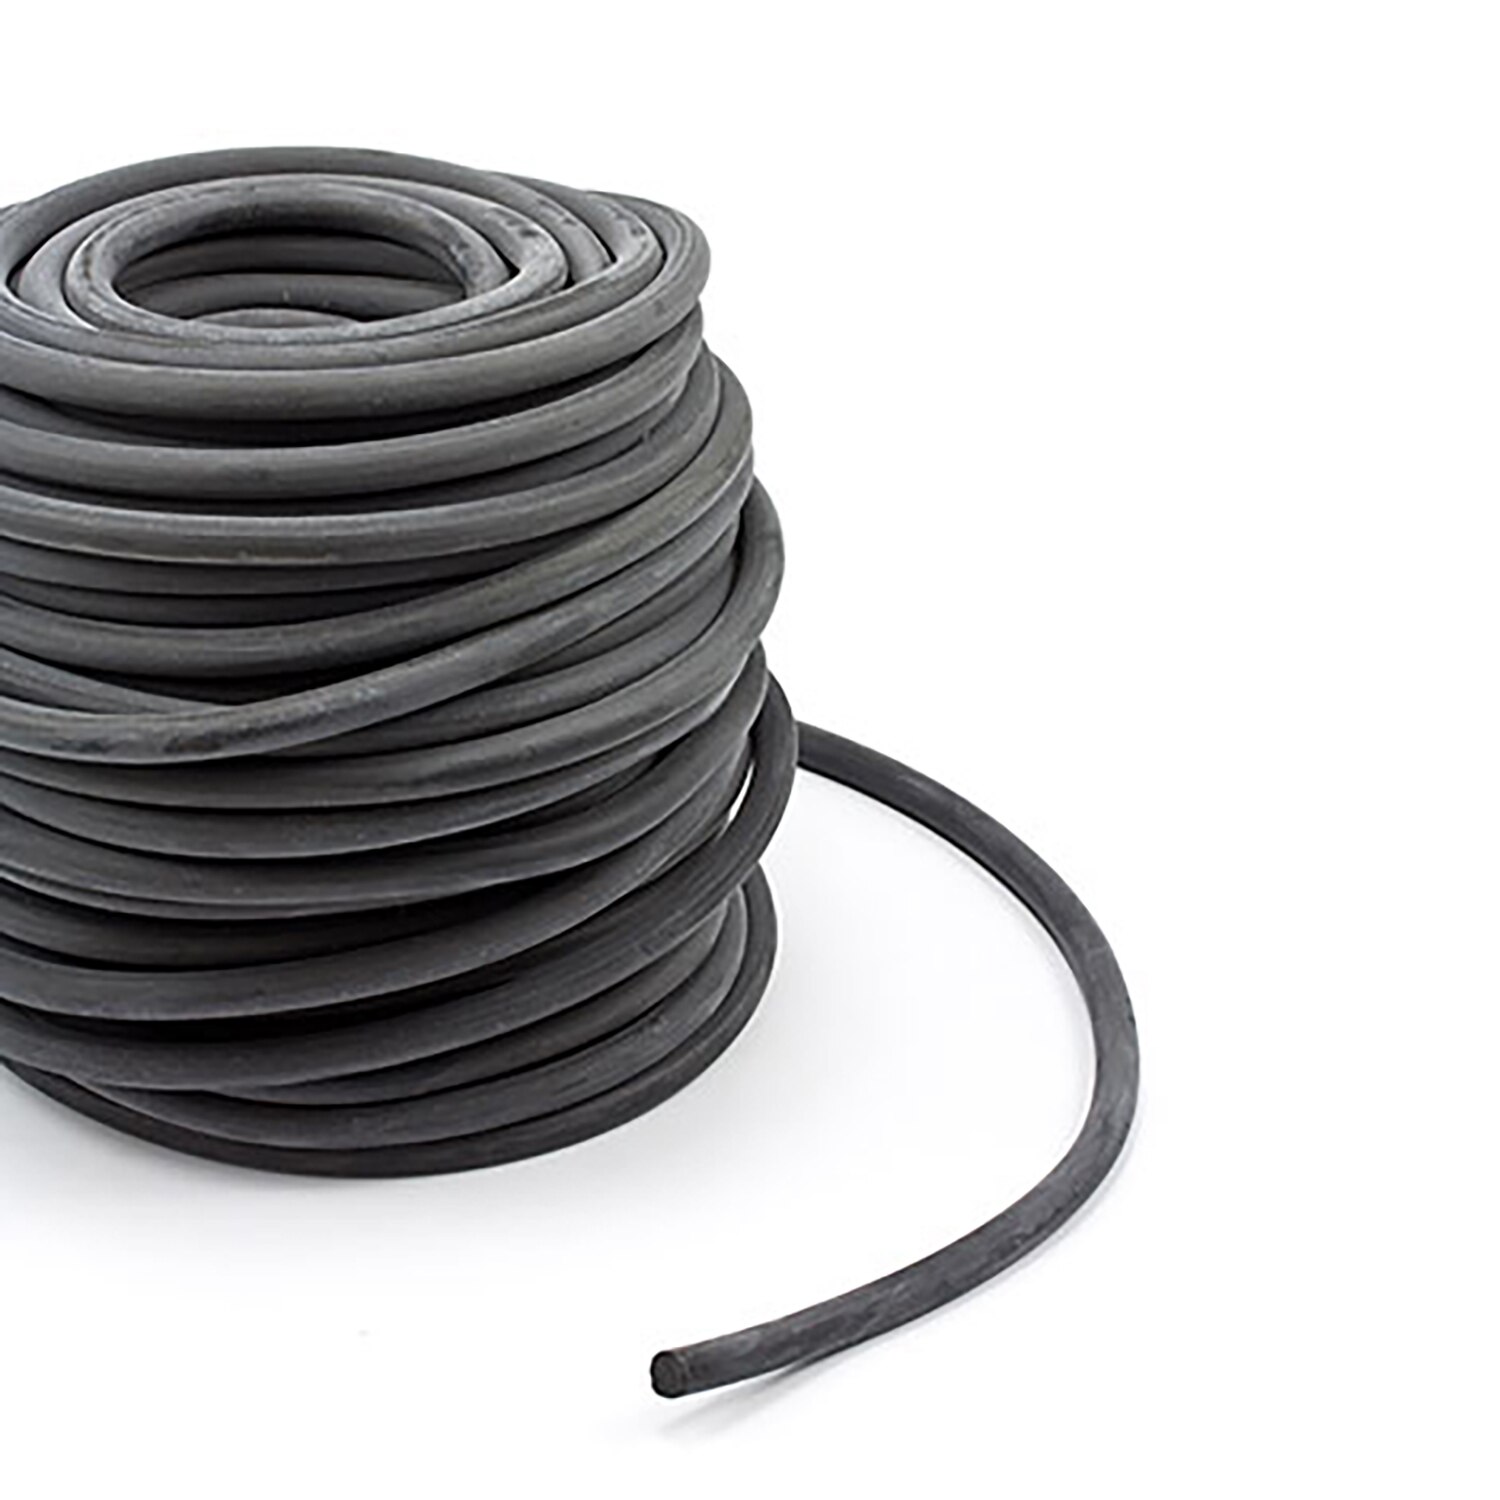 Synthetic Rubber (EPDM) Rope 7/16 Coil 933043701 (150 feet)